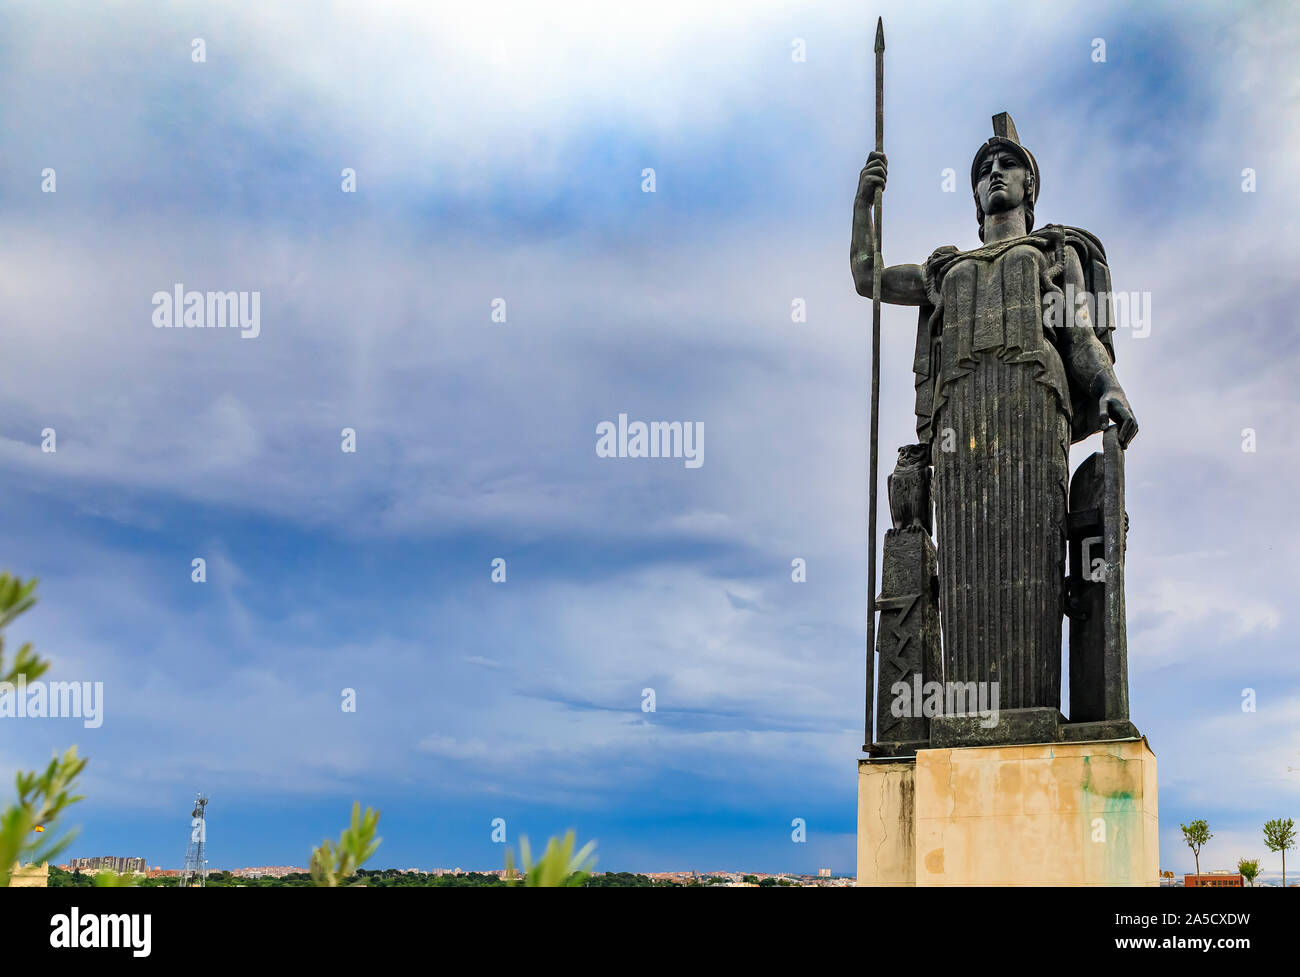 Madrid, Spain - June 4, 2017: Statue of Minerva Roman Goddess of Wisdom and Art on Circulo de Bellas Artes rooftop terrace, dramatic sky in background Stock Photo